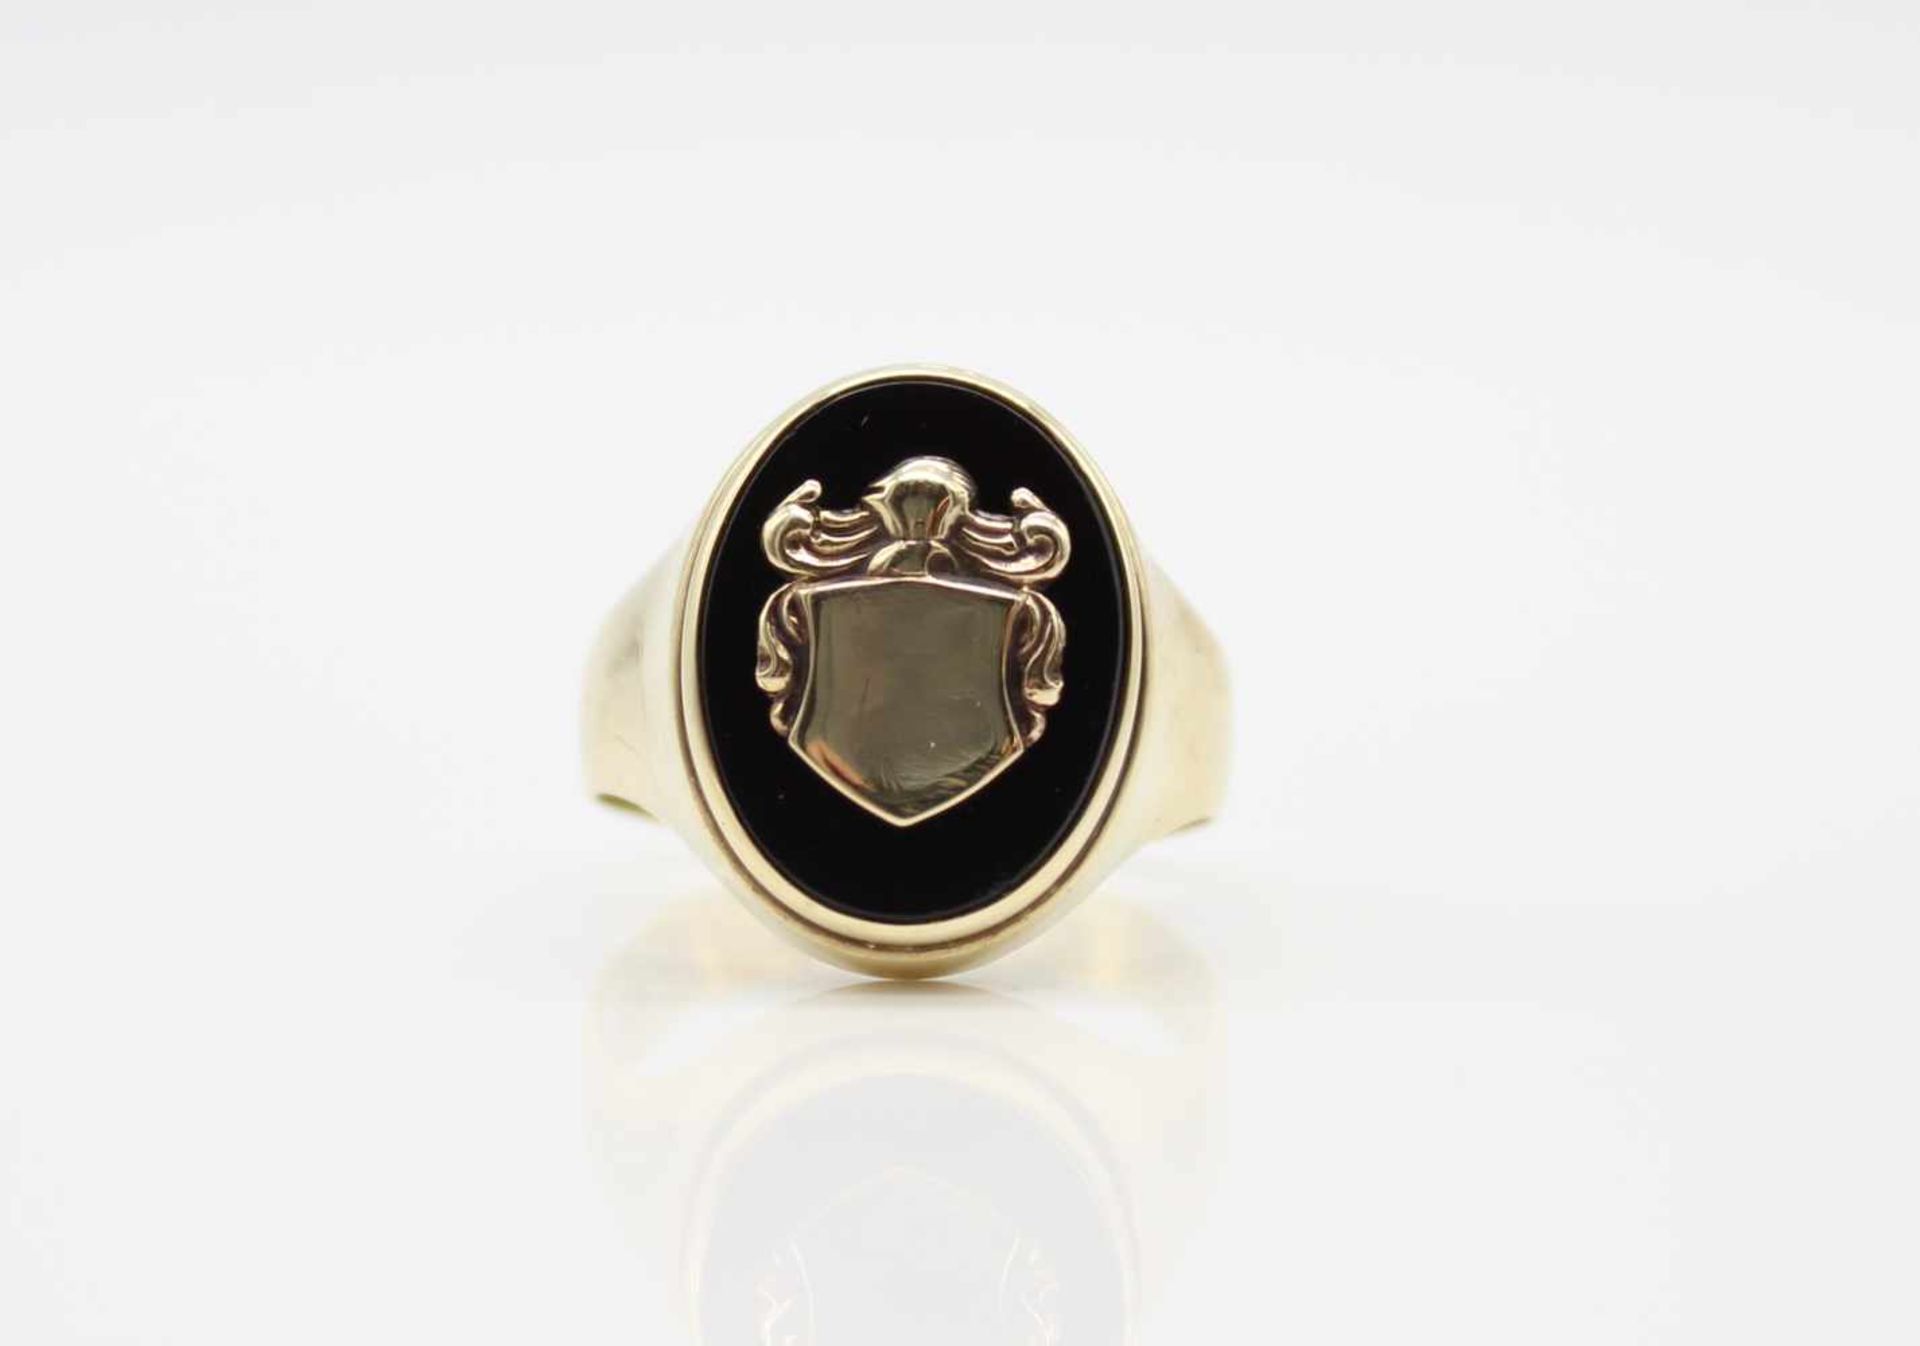 Coat of arms ring from 333er gold with an Onyx.Weight 5.3 g, size 66- - -15.00 % buyer's premium